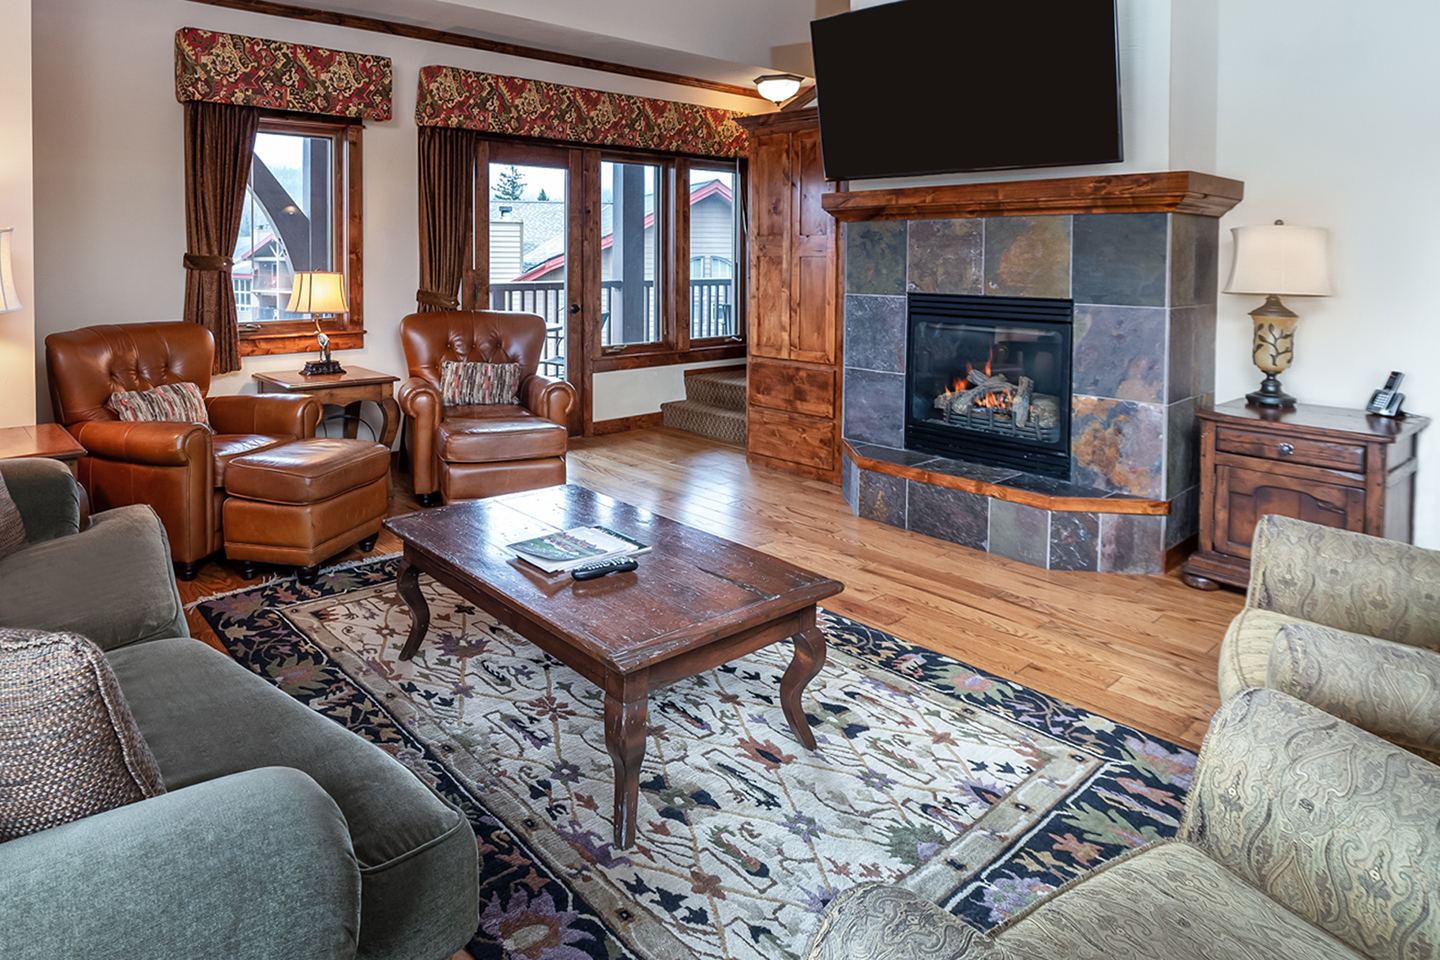 This premier lakefront suite offers incredible views of Whitefish Lake. – Michael Klippert